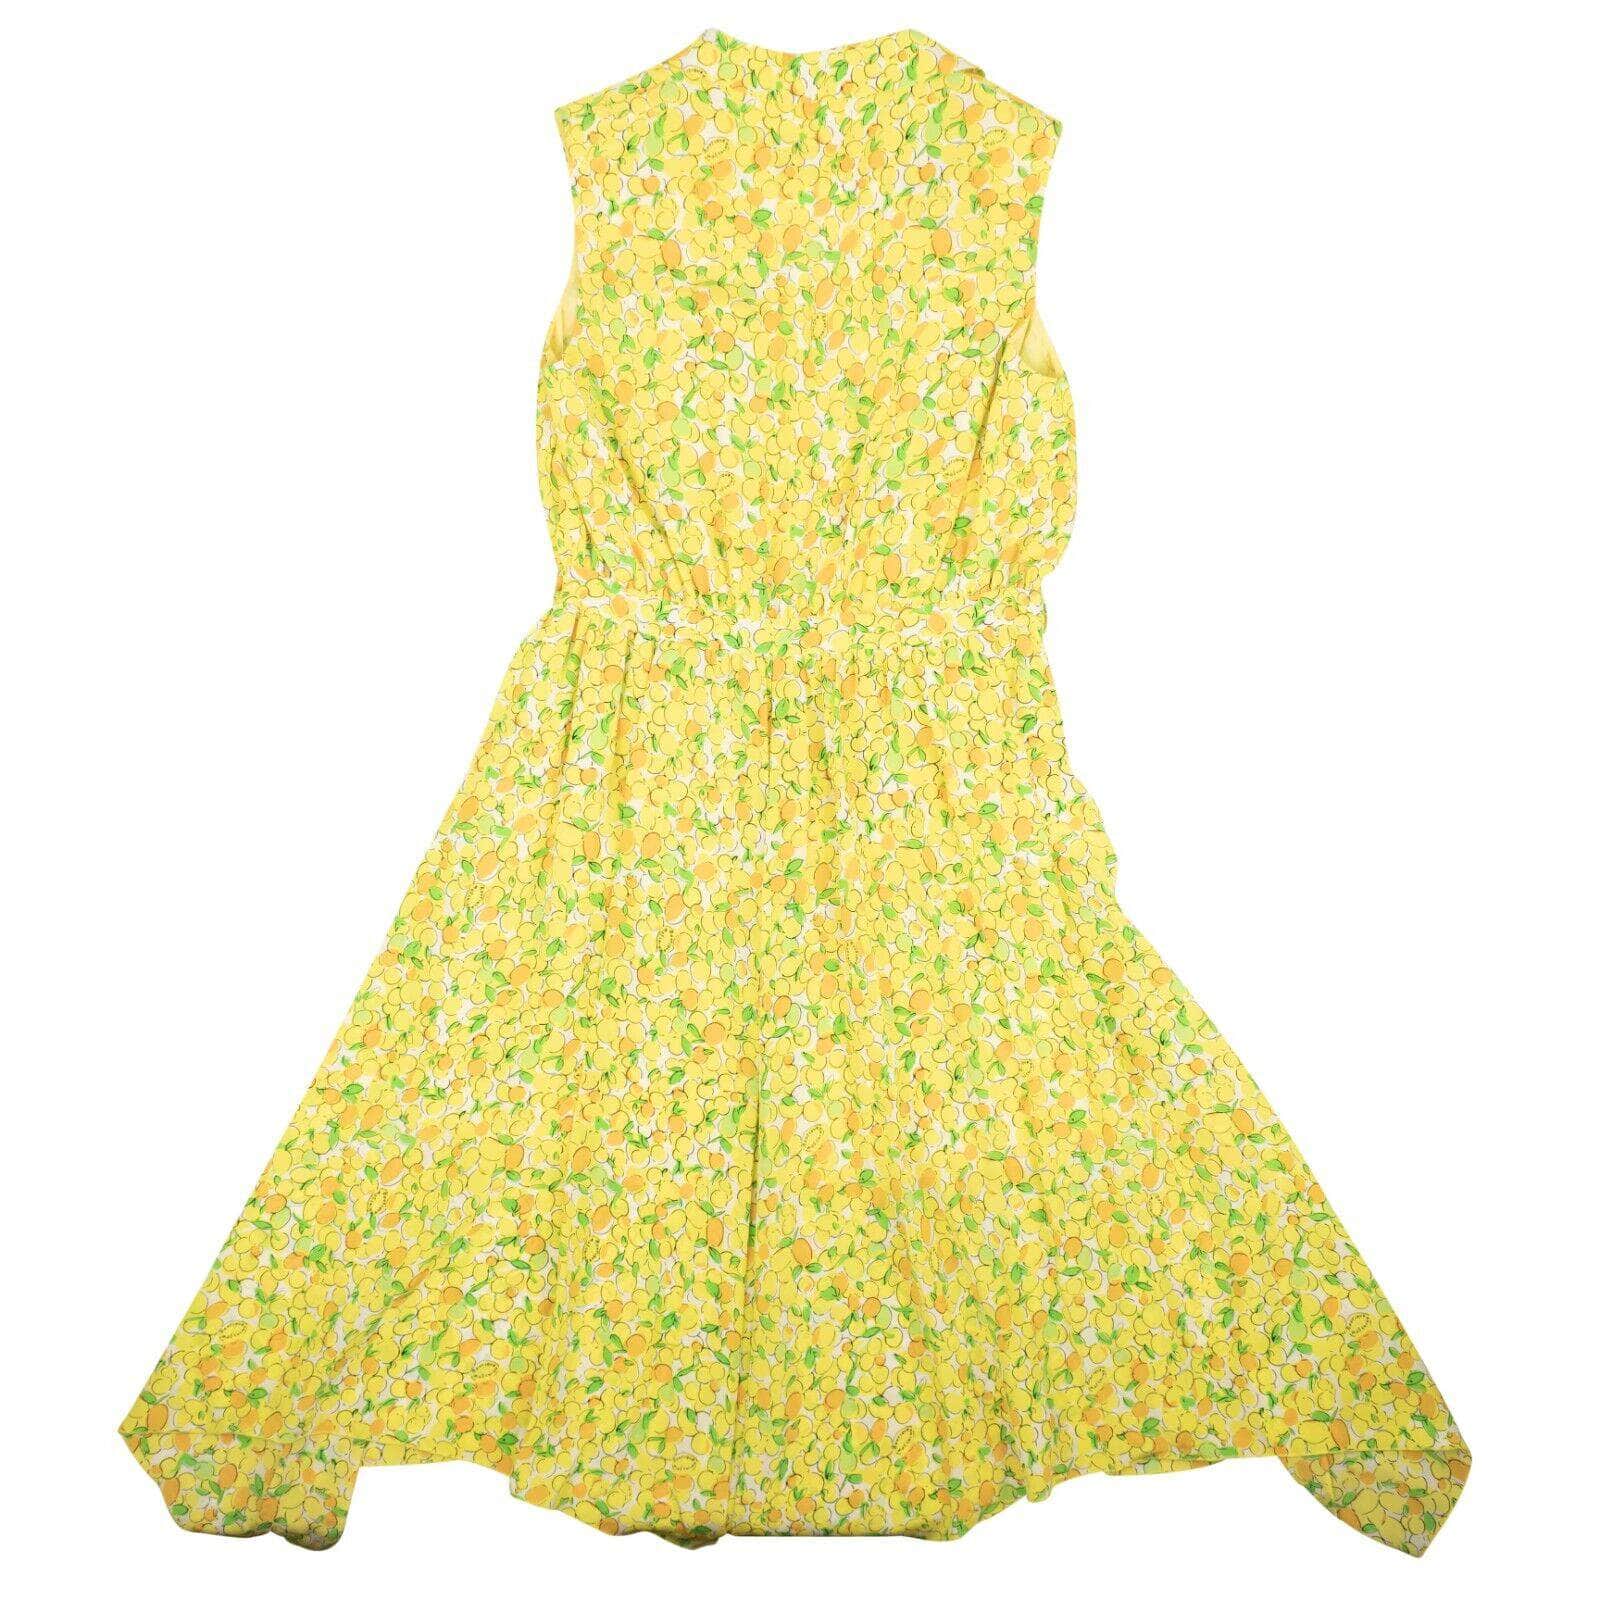 BOUTIQUE MOSCHINO 250-500, boutique-moschino, channelenable-all, chicmi, couponcollection, gender-womens, main-clothing, size-38, size-44, size-46, womens-day-dresses Yellow Lemon Silk Wrap Assymetrical Dress